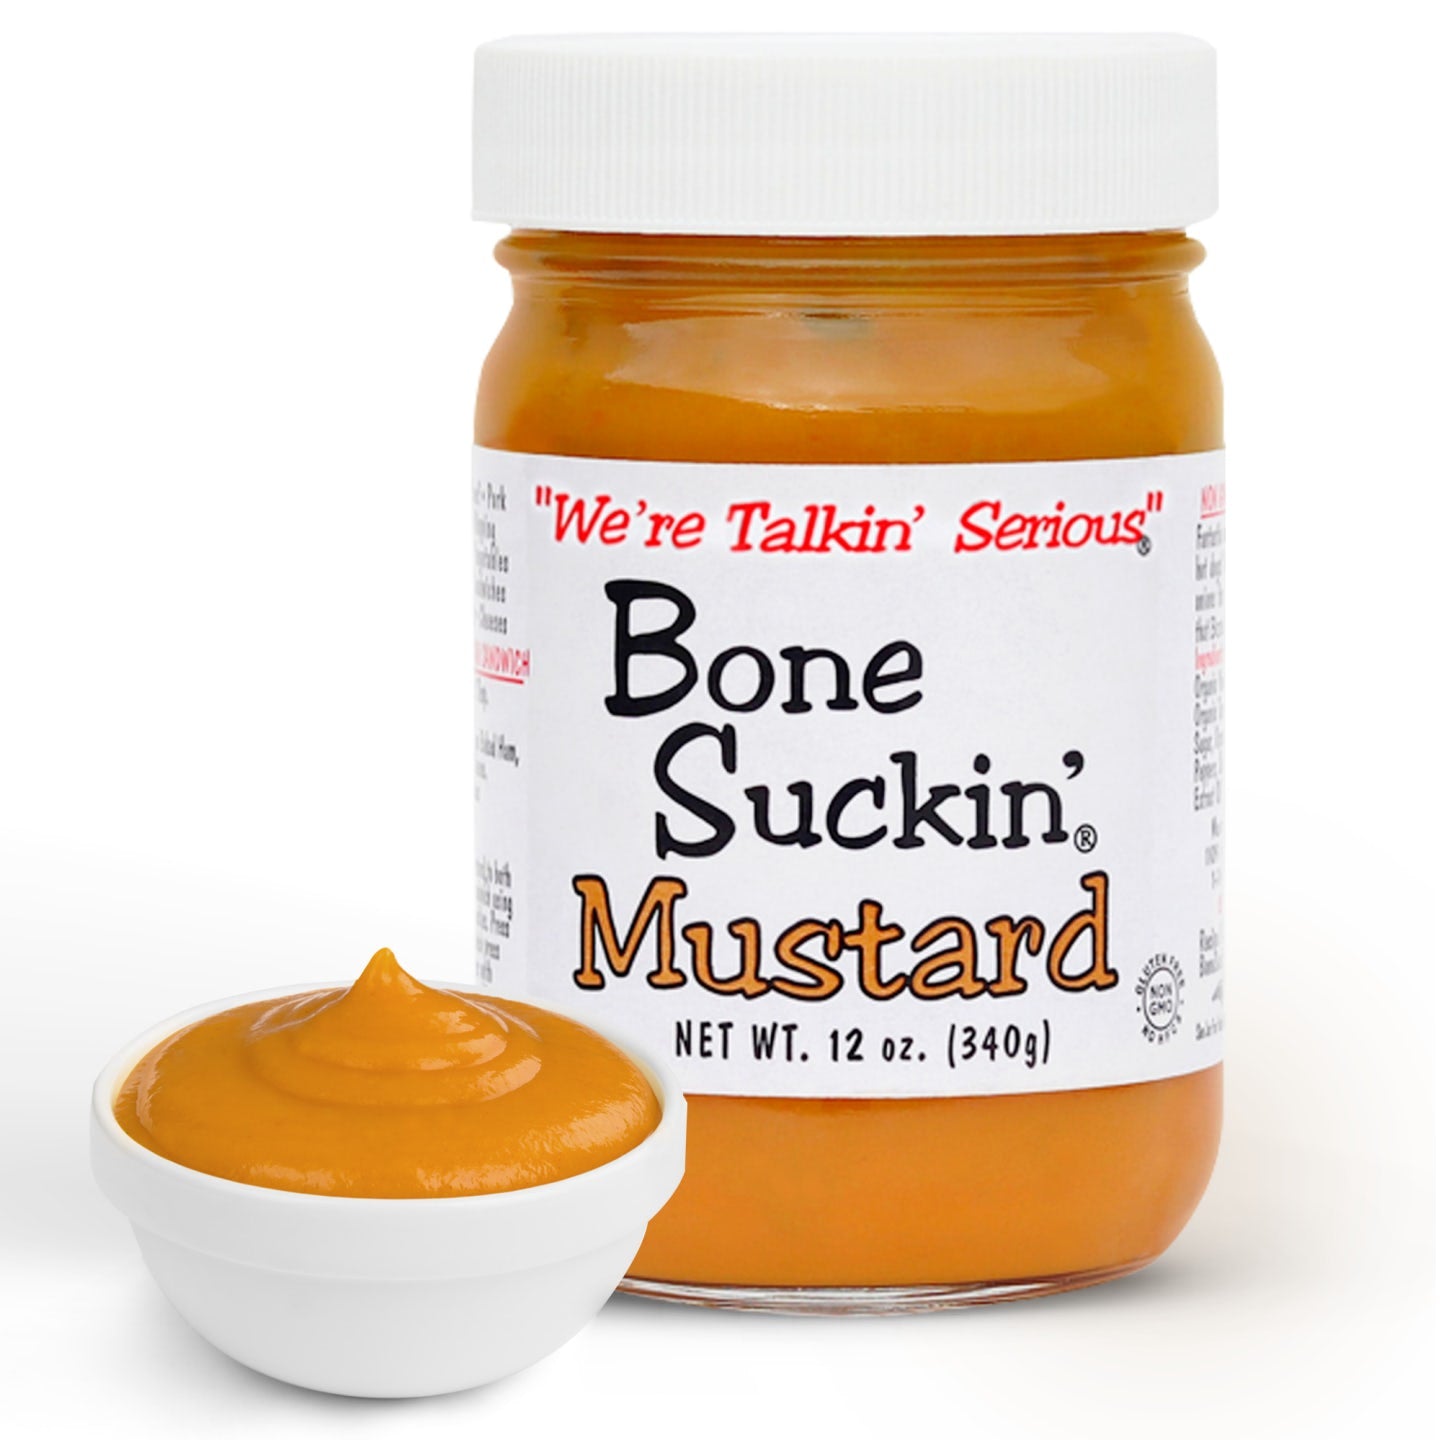 World Champion Mustard!  Bone Suckin' Mustard is a sweet combination of brown sugar, molasses and paprika, with a zingy finish. It has the same great flavor as the Sweet Spicy Mustard that won the National Championship & 1st place in the Great American Barbecue Contest in Kansas City, without the heat. Bone Suckin'® Mustard is perfect for grilling, dipping, and even straight off the spoon.